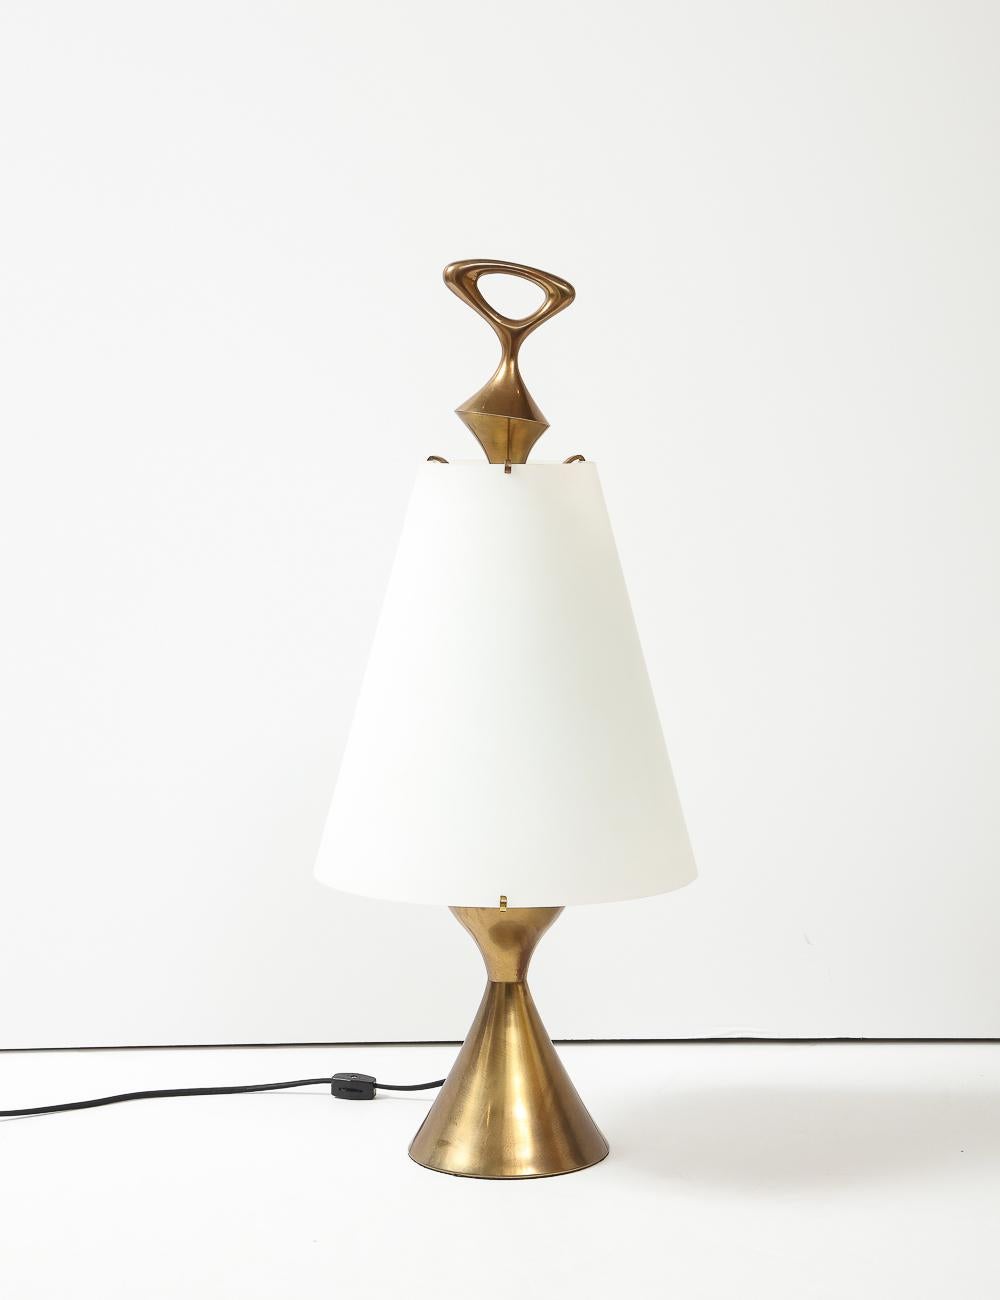 Hand-Crafted Rare Pair of Table Lamps by Max Ingrand for Fontana Arte